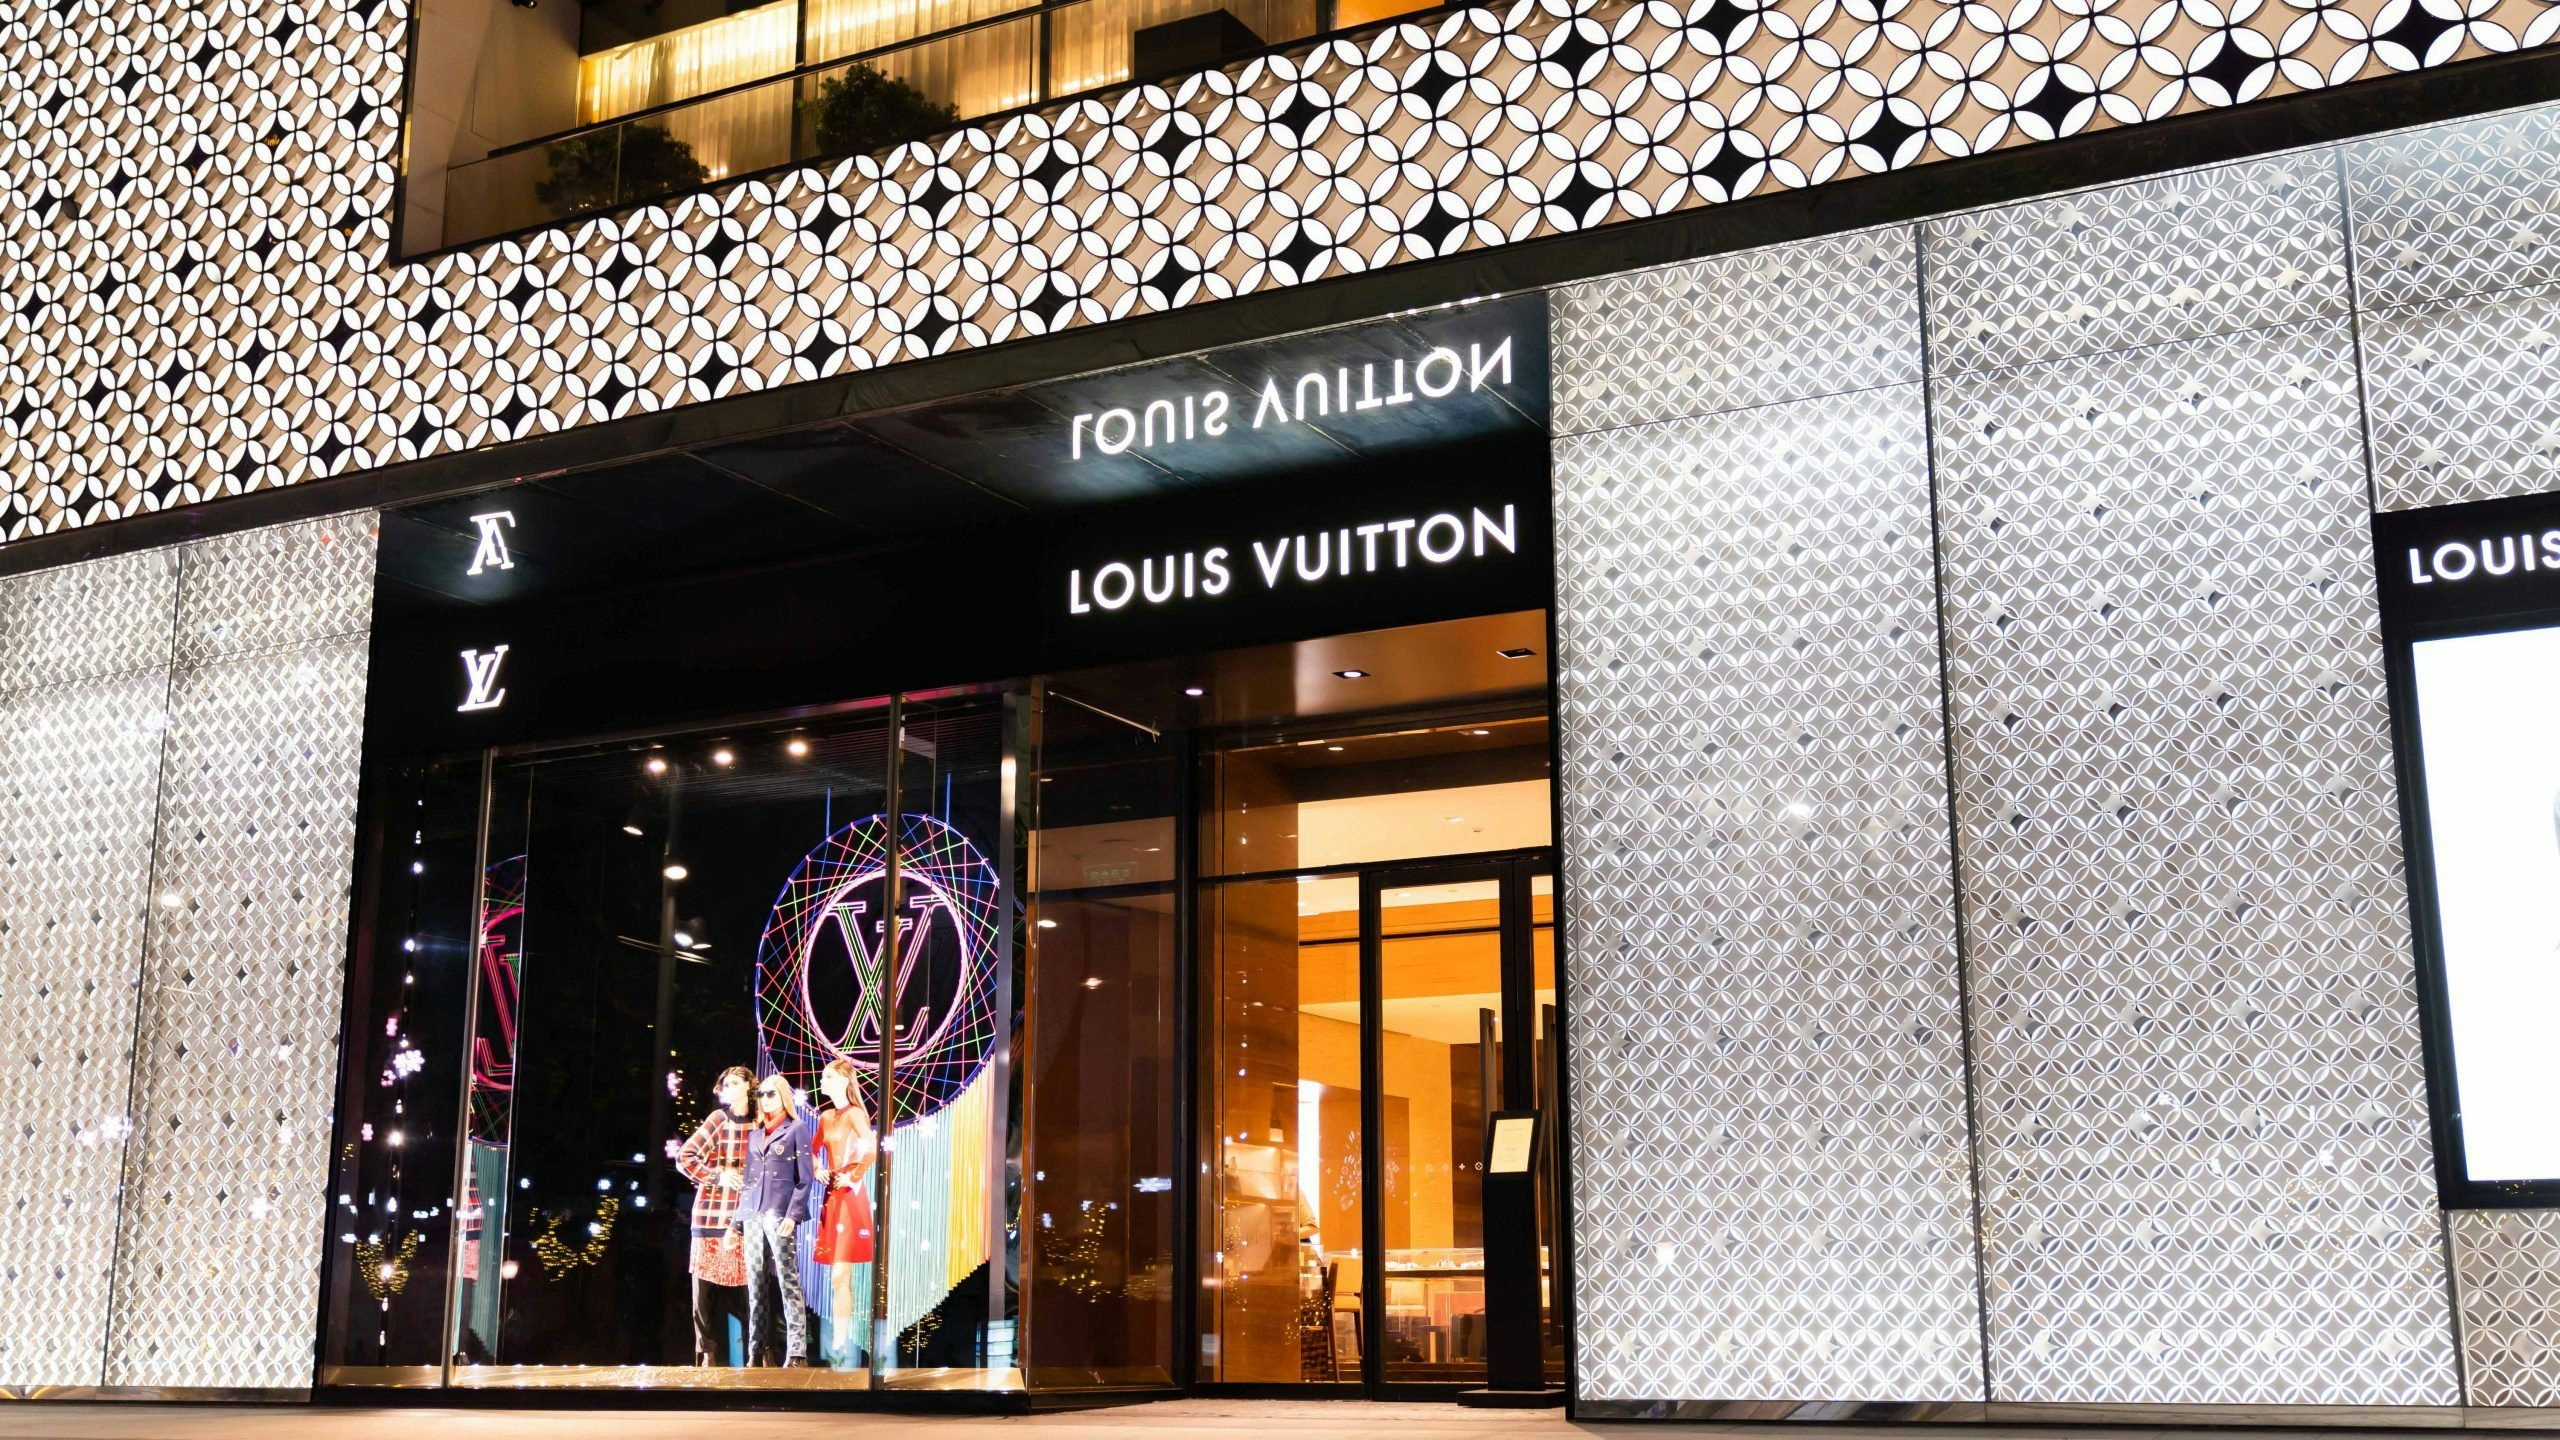 From boom to uncertainty: Luxury brands face uphill battle as China's growth slows